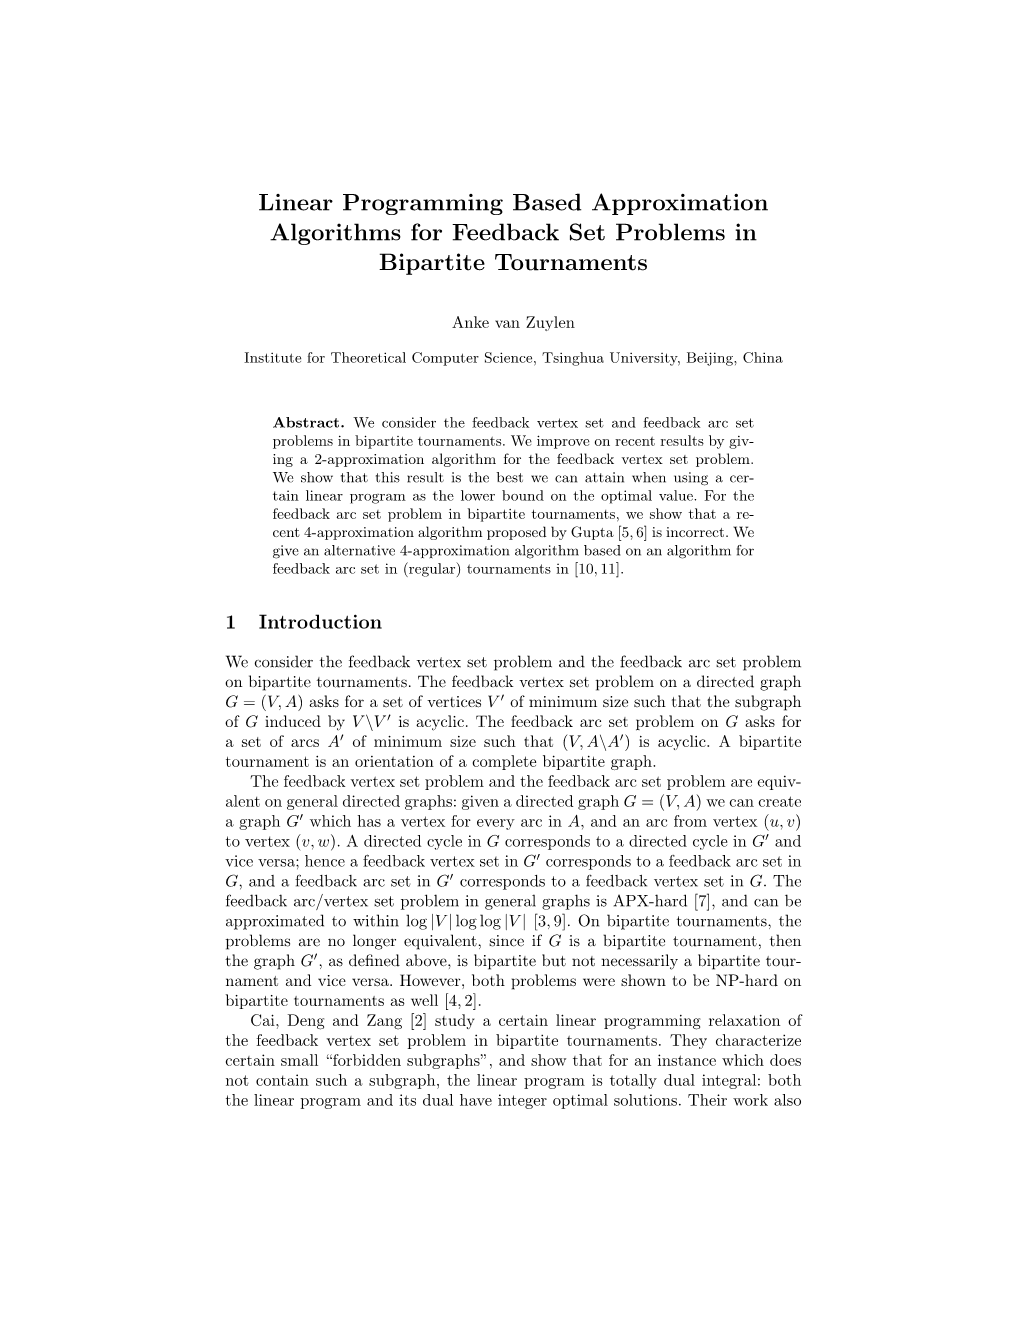 Linear Programming Based Approximation Algorithms for Feedback Set Problems in Bipartite Tournaments